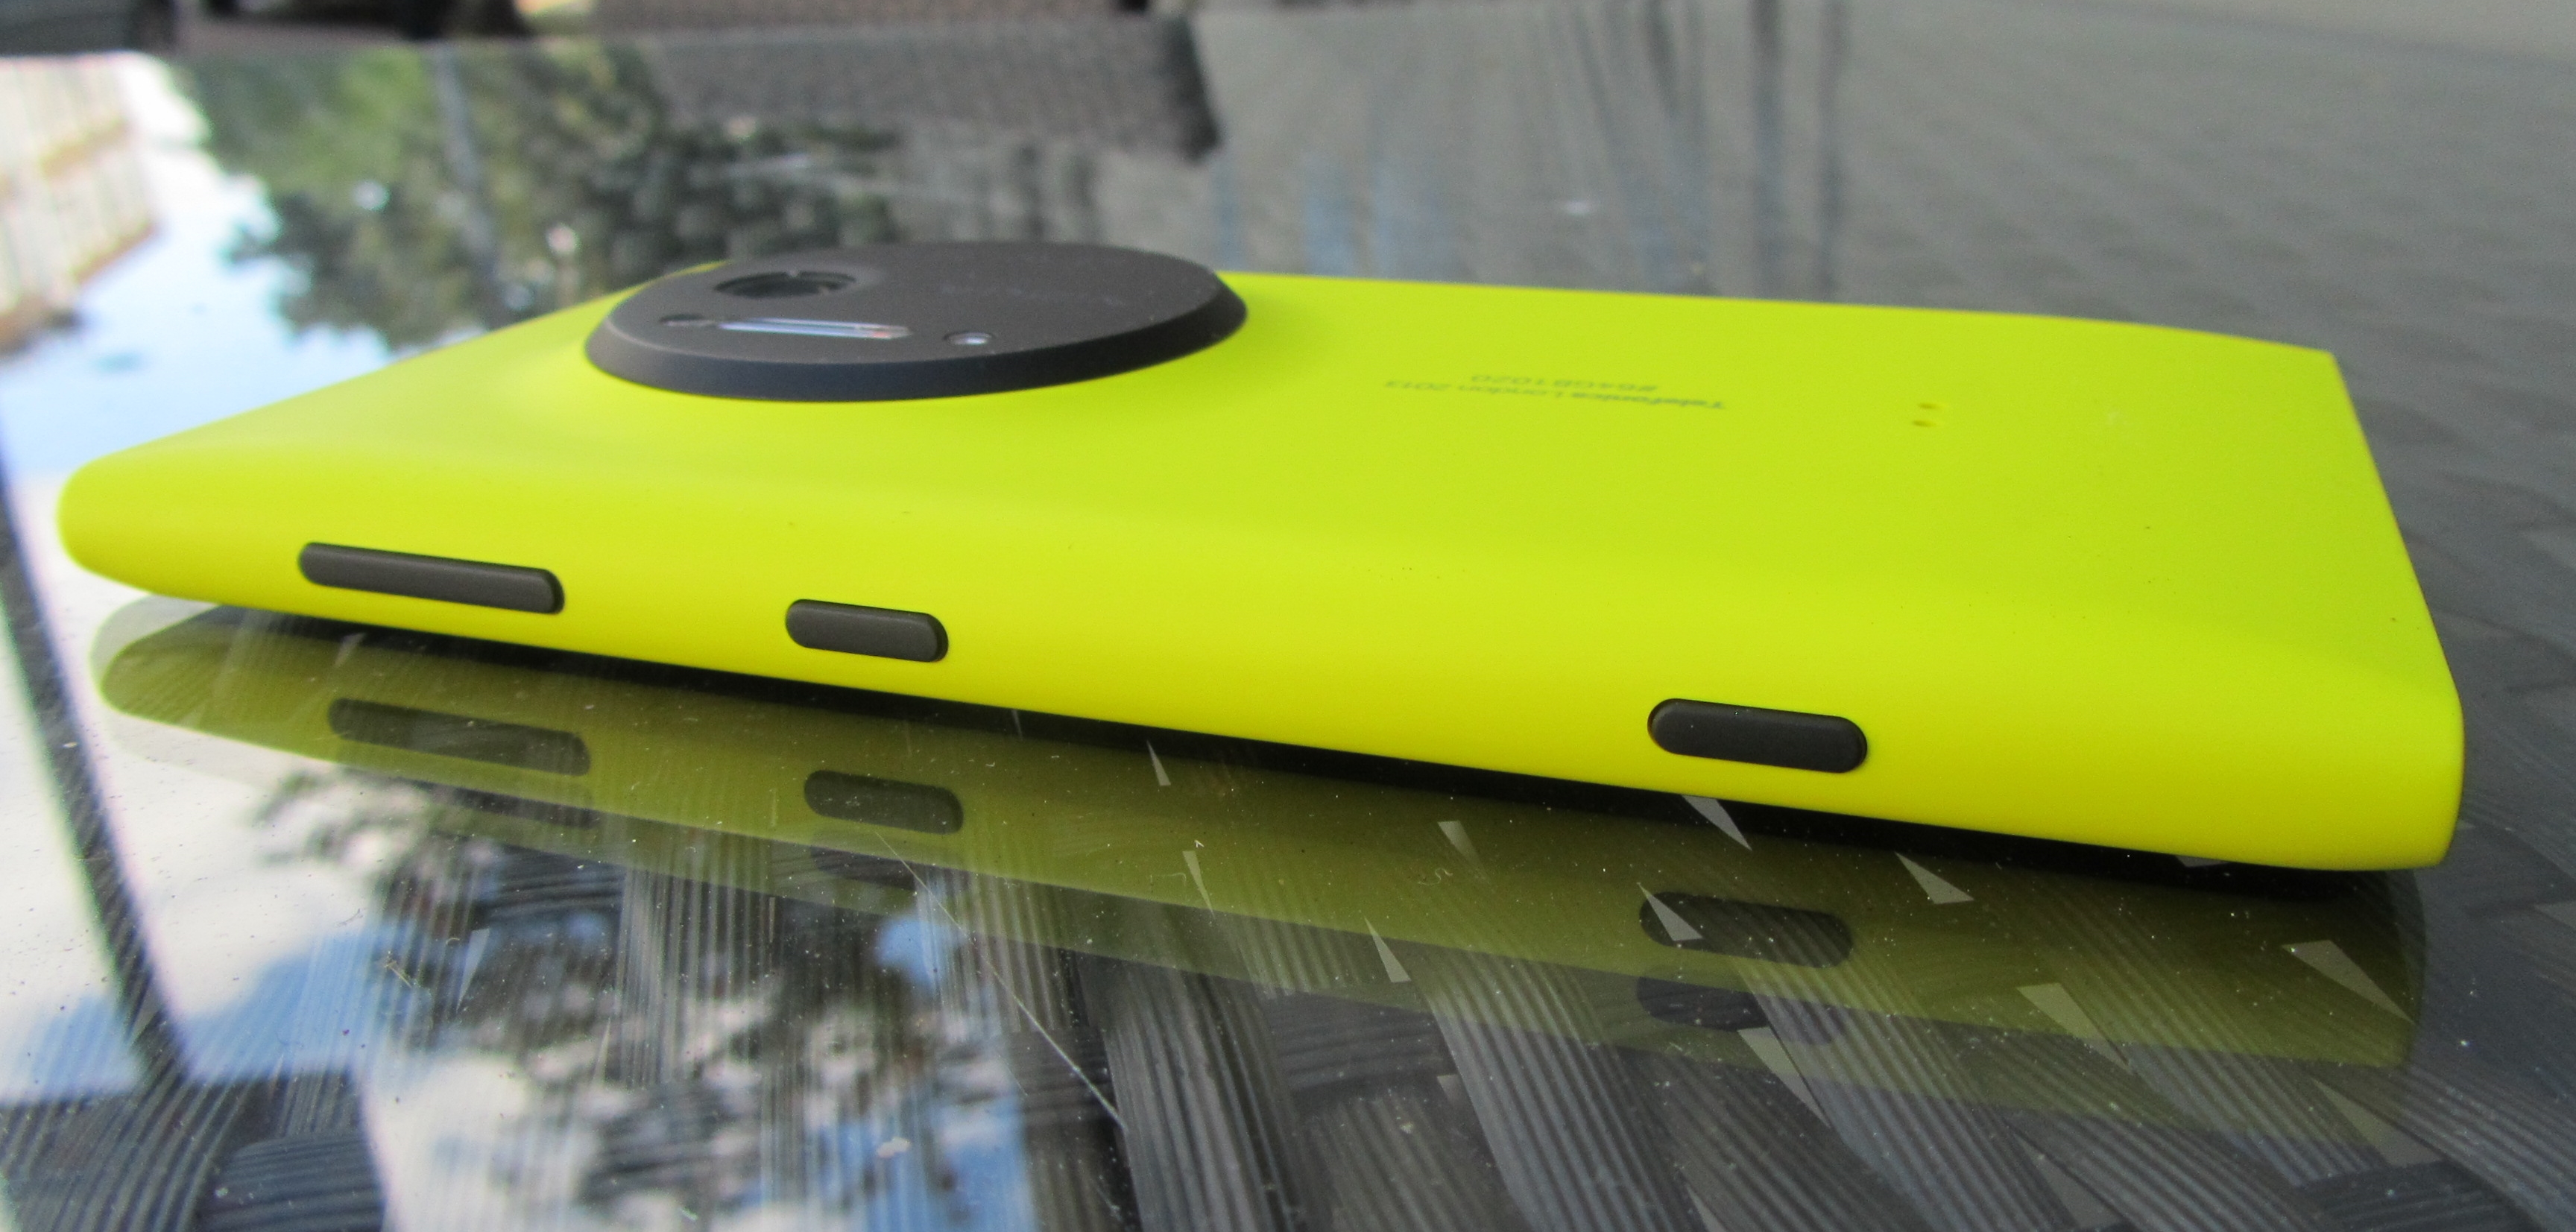 1020 rear Nokia Lumia 1020 review: The best camera phone, but not the best smartphone